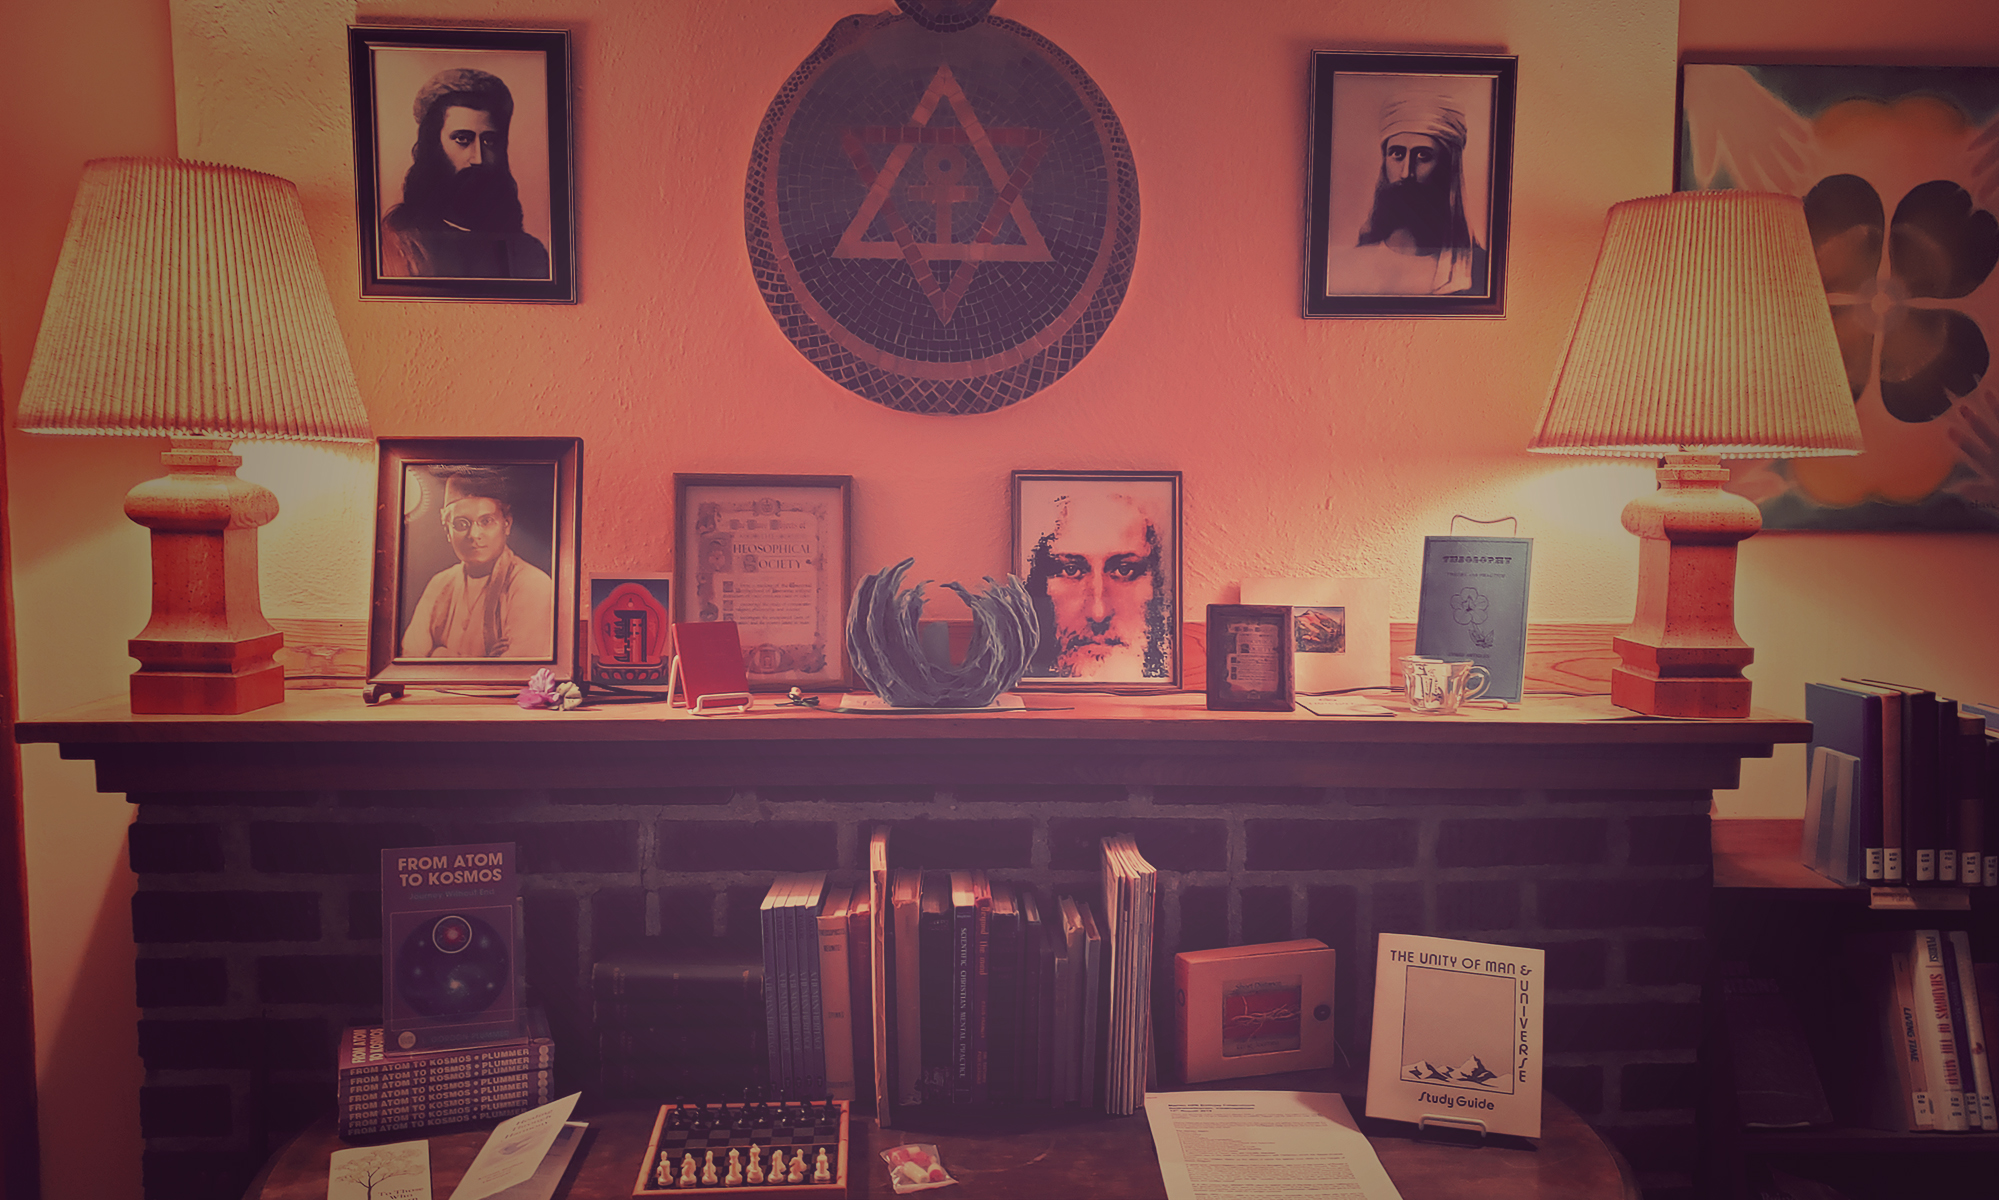 The Theosophical Society in Seattle